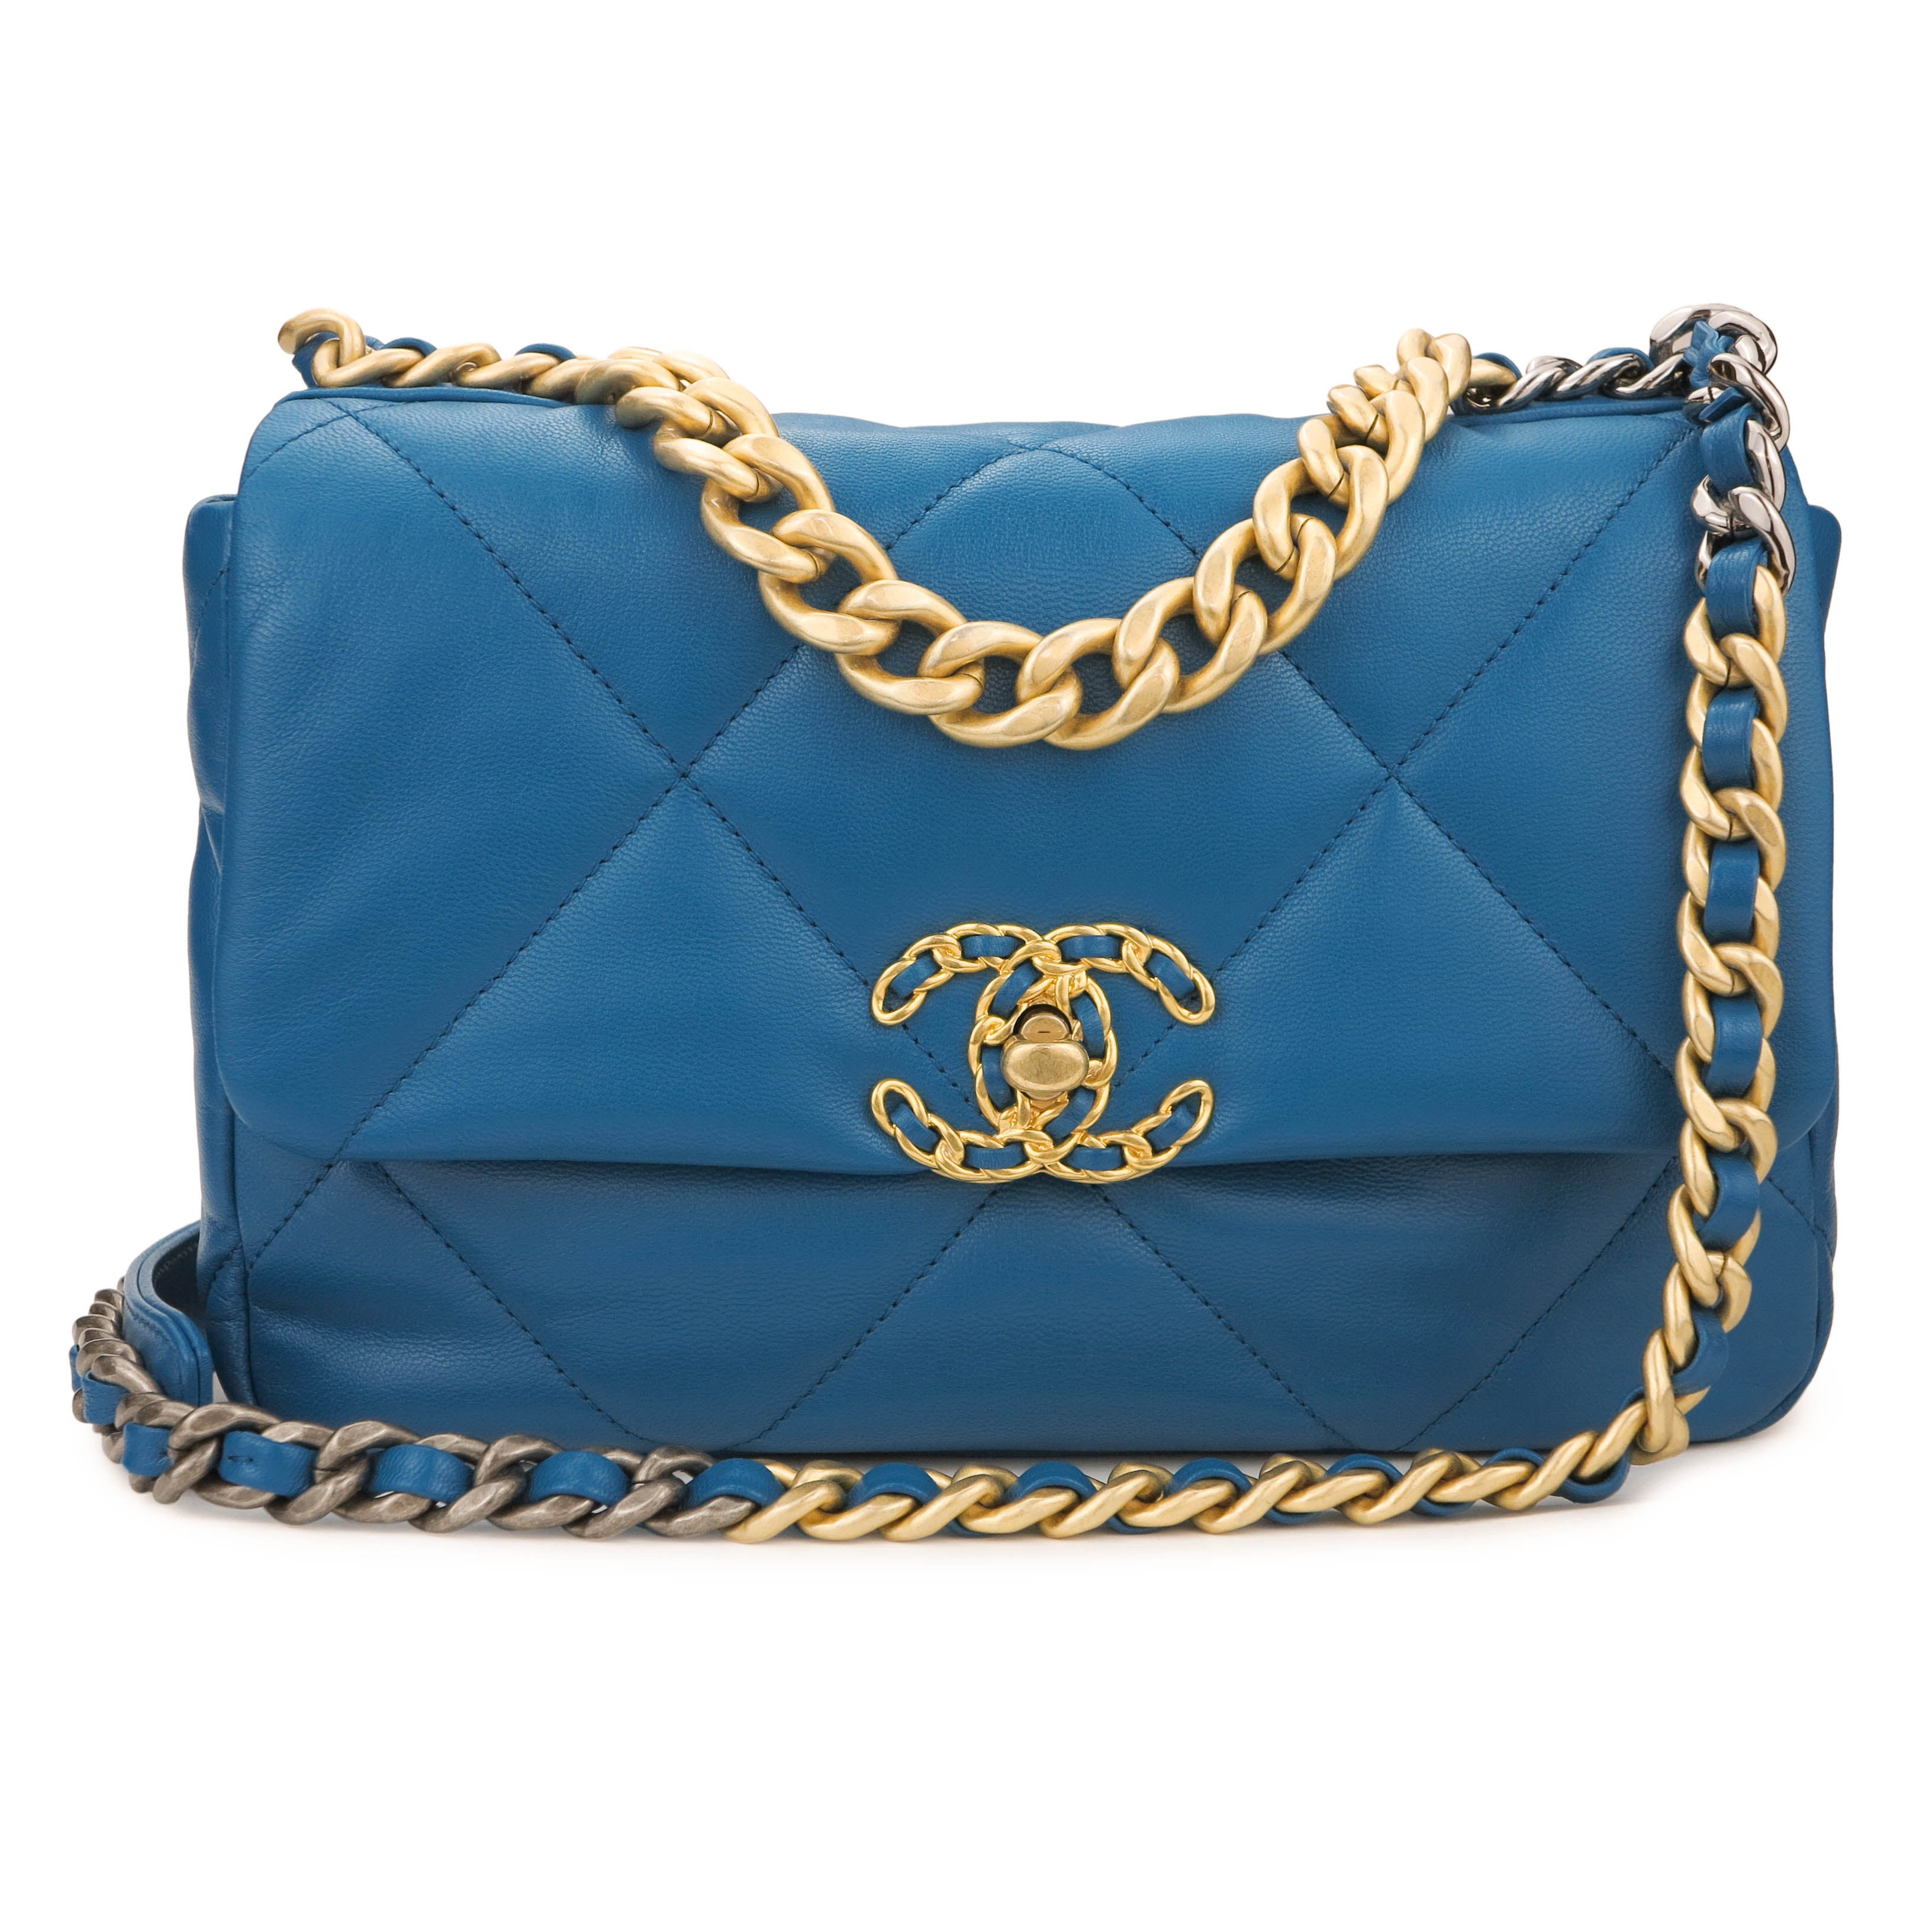 CHANEL CHANEL 19 Small Flap Bag in Teal Blue Lambskin